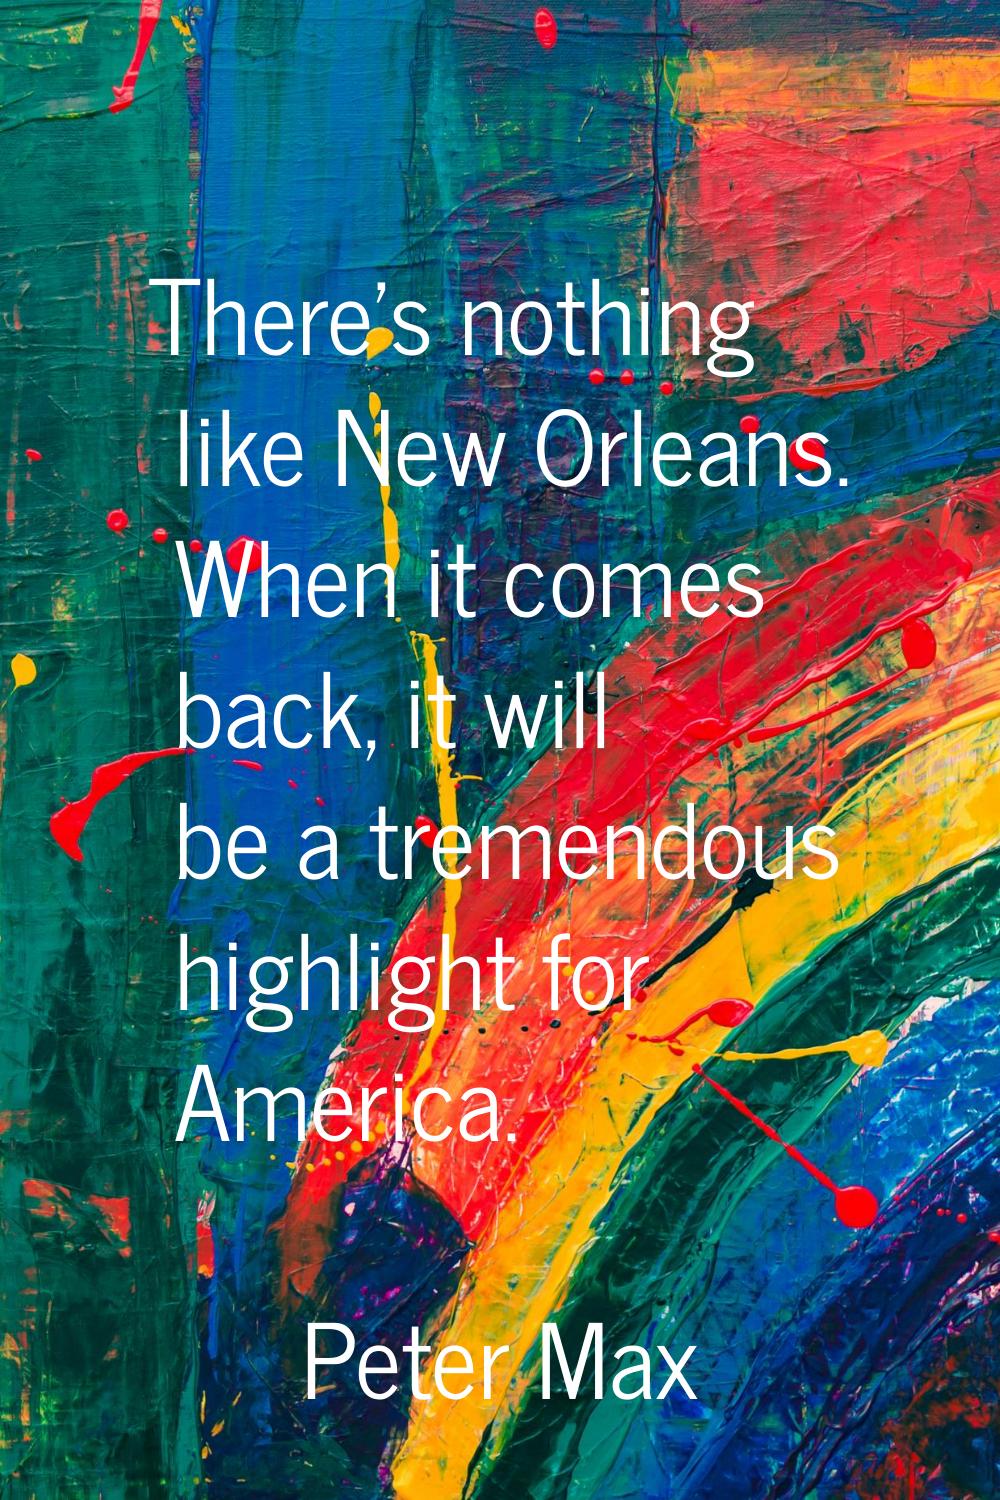 There's nothing like New Orleans. When it comes back, it will be a tremendous highlight for America